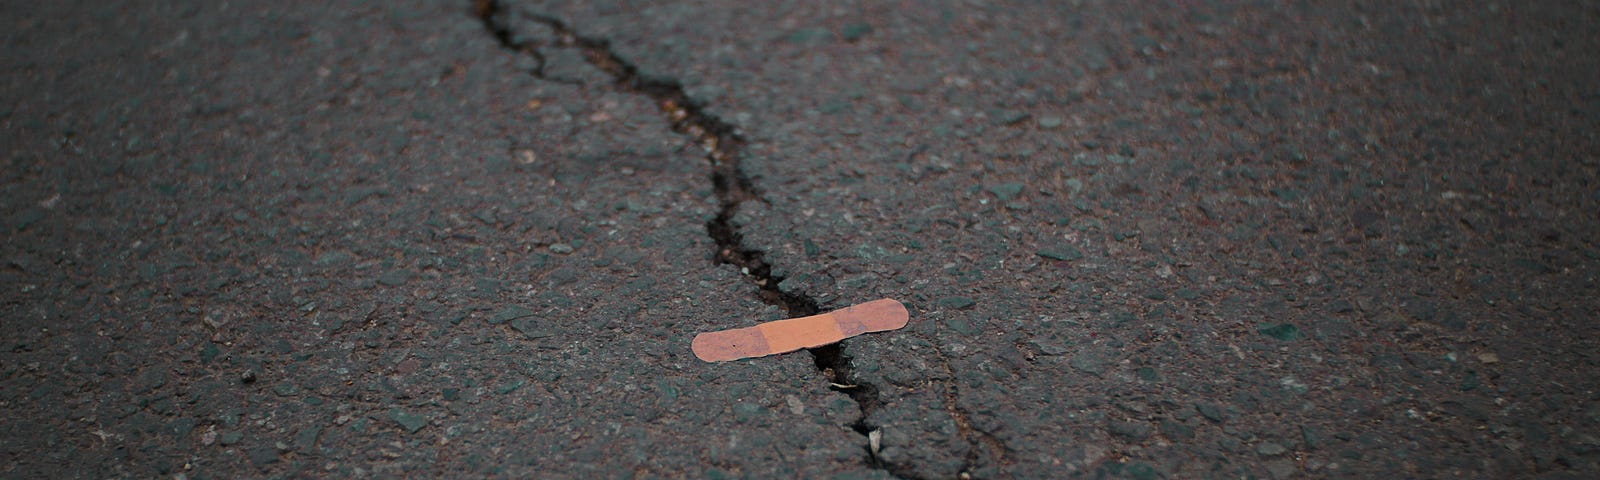 A crack in the road patched with a band-aid.